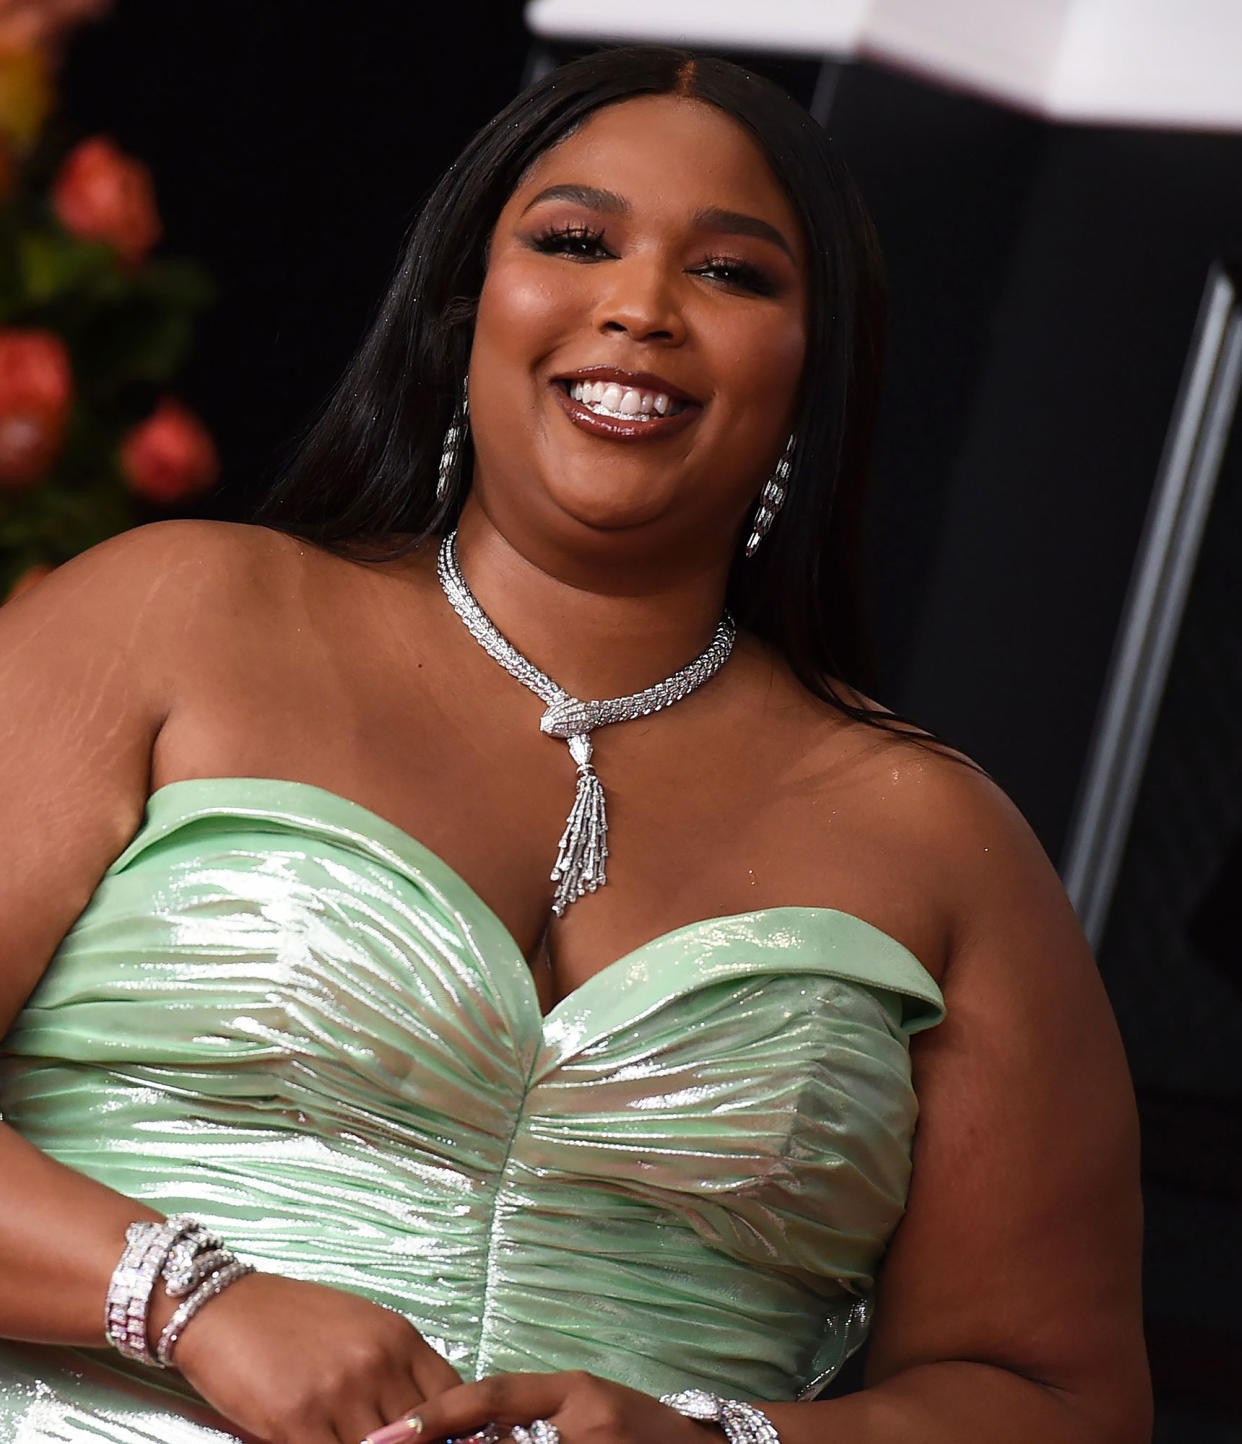 Au Natural! Lizzo Shares Unedited Nude Selfie for #DoveSelfEsteemProject